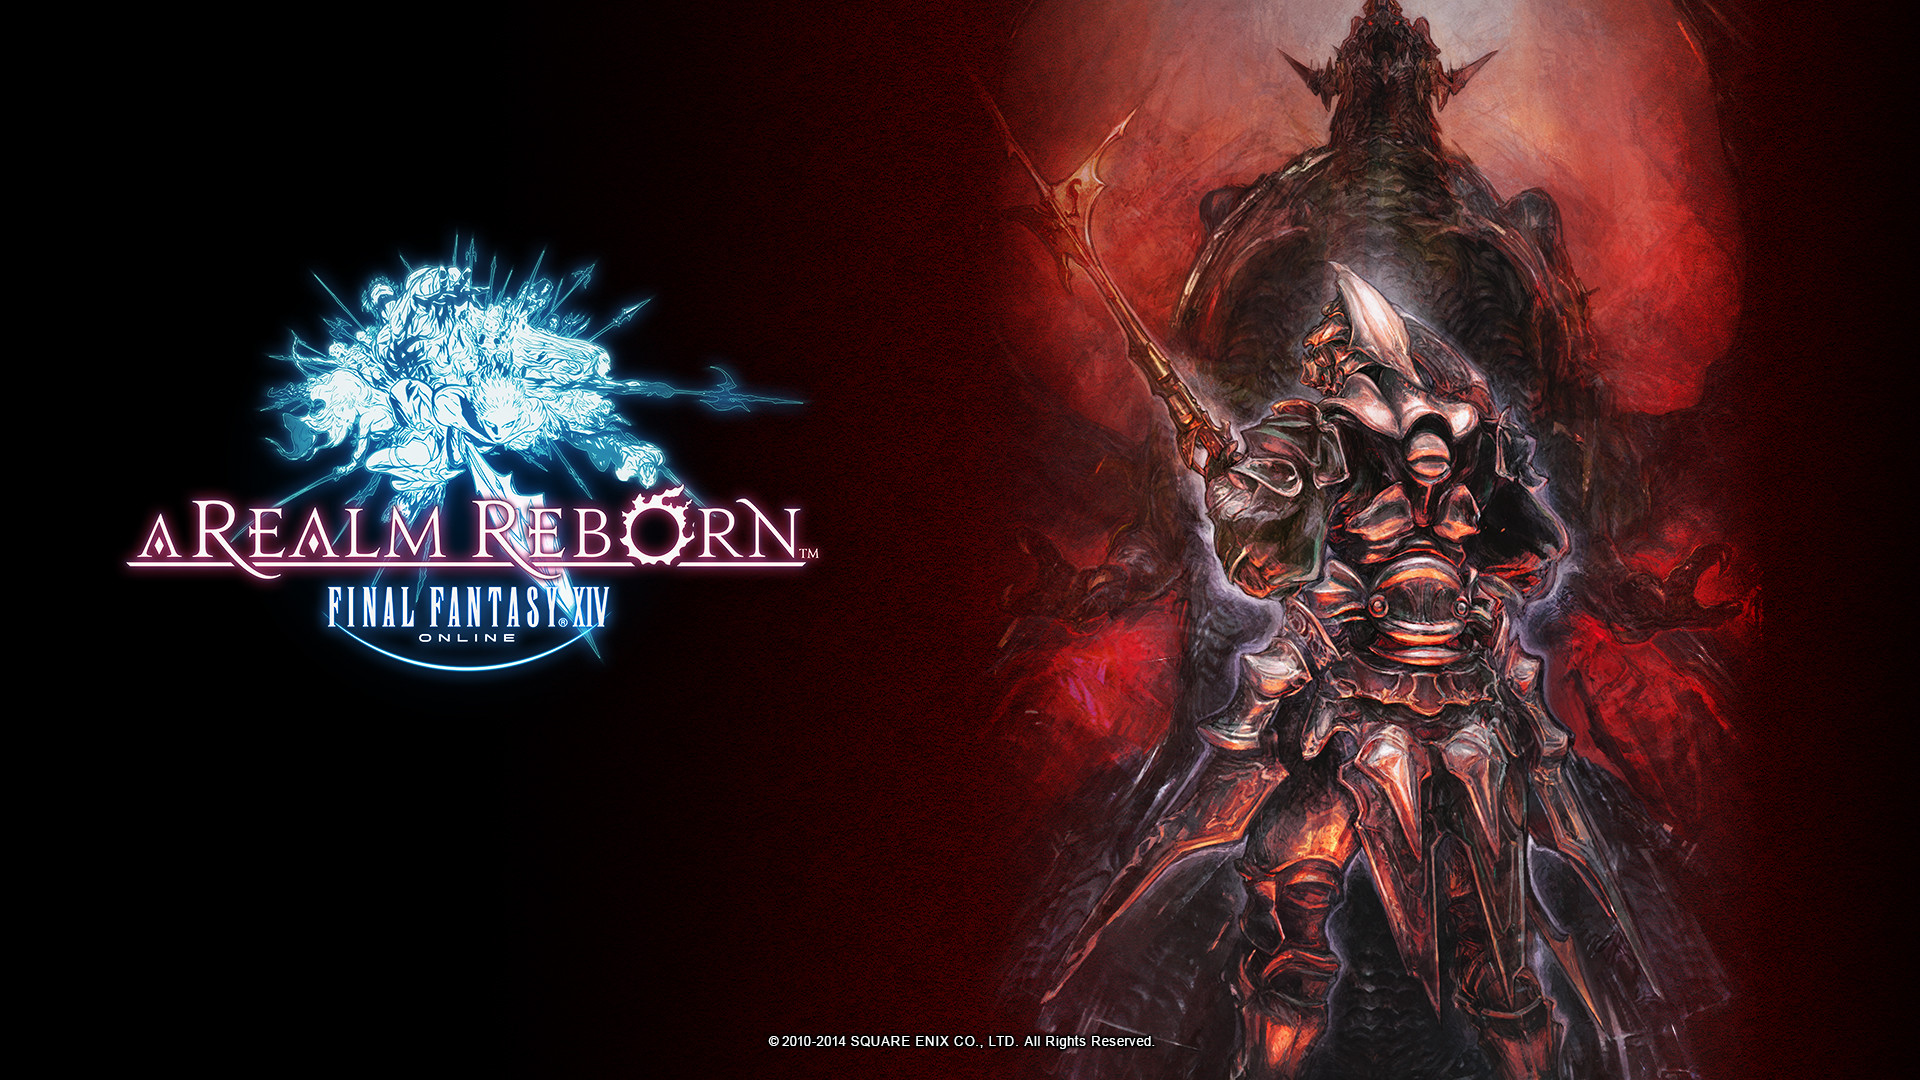 1920x1080 Square Enix has released new amazing Final Fantasy XIV: A Realm Reborn  wallpapers! This time they are featuring Gaius and Bahamut, who are main  villains in ...